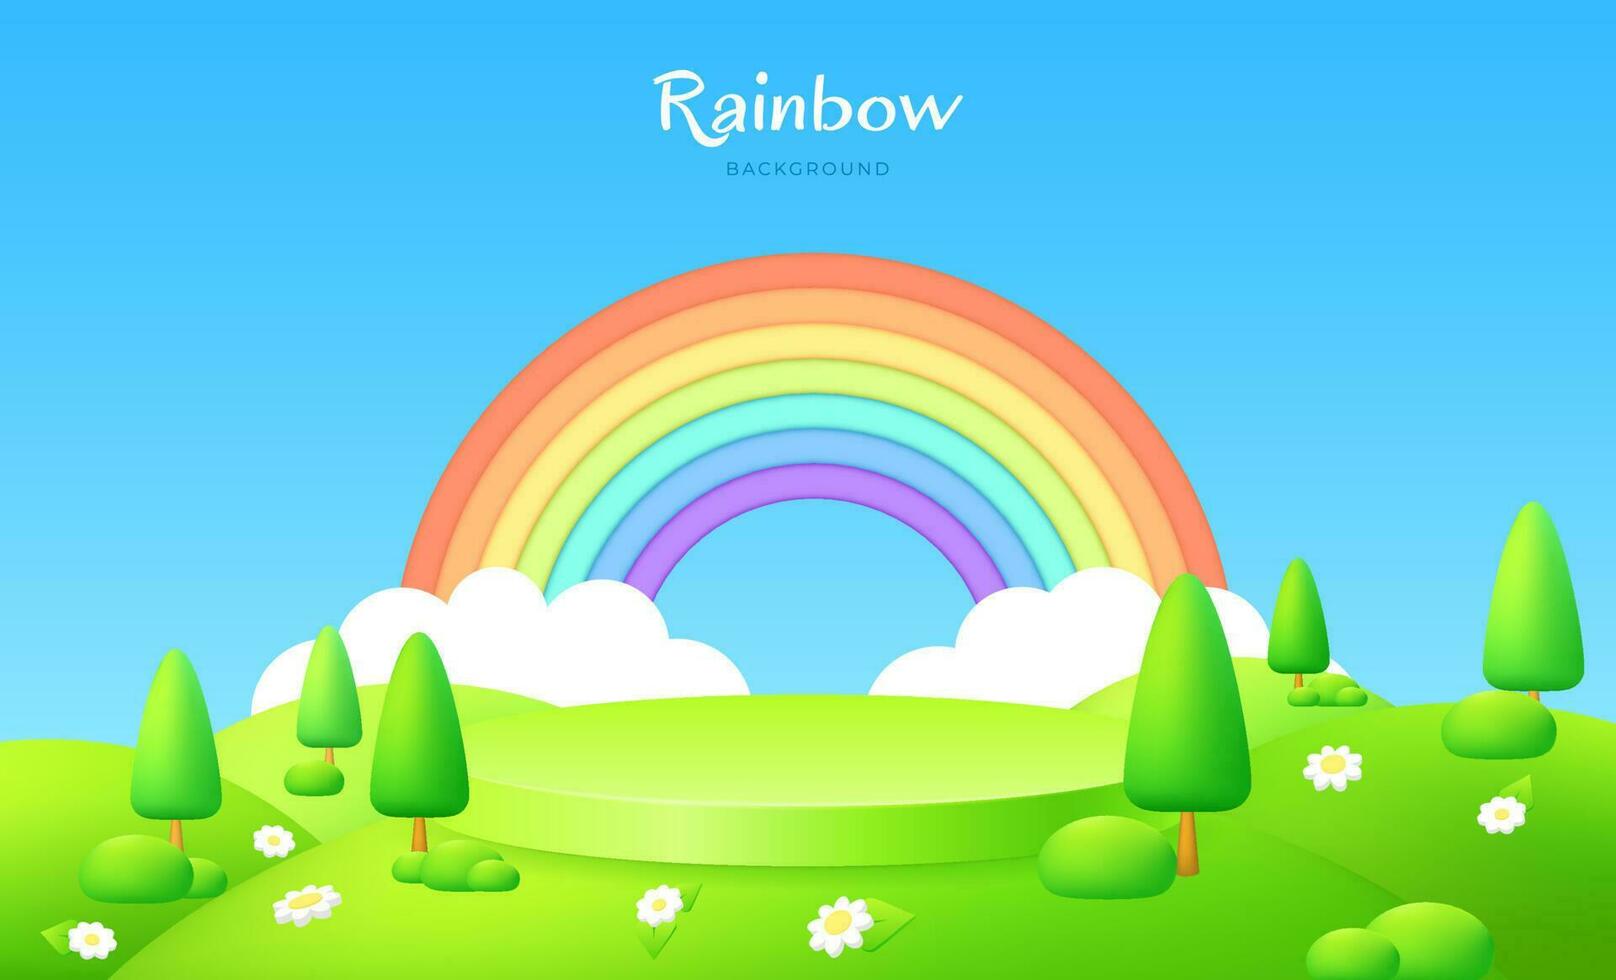 Green Meadow Landscape with Pedestal Stand  Modern 3D Vector Illustration for Summer Banner, Product Presentation or Website Design. Cartoon Rainbow with Clouds in the Blue Sky.